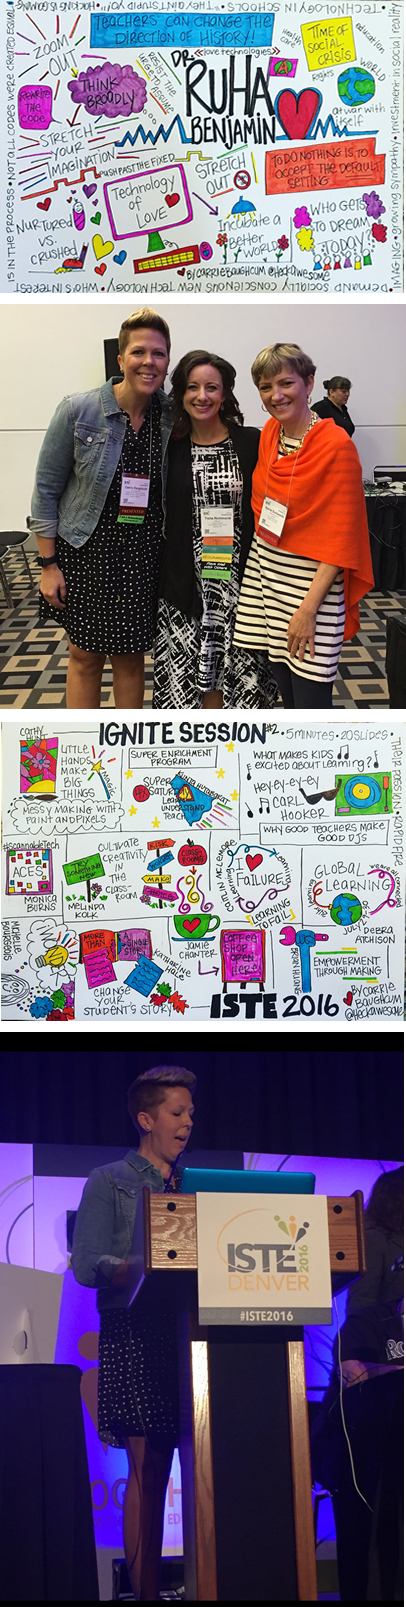 ISTE 2016 Moment